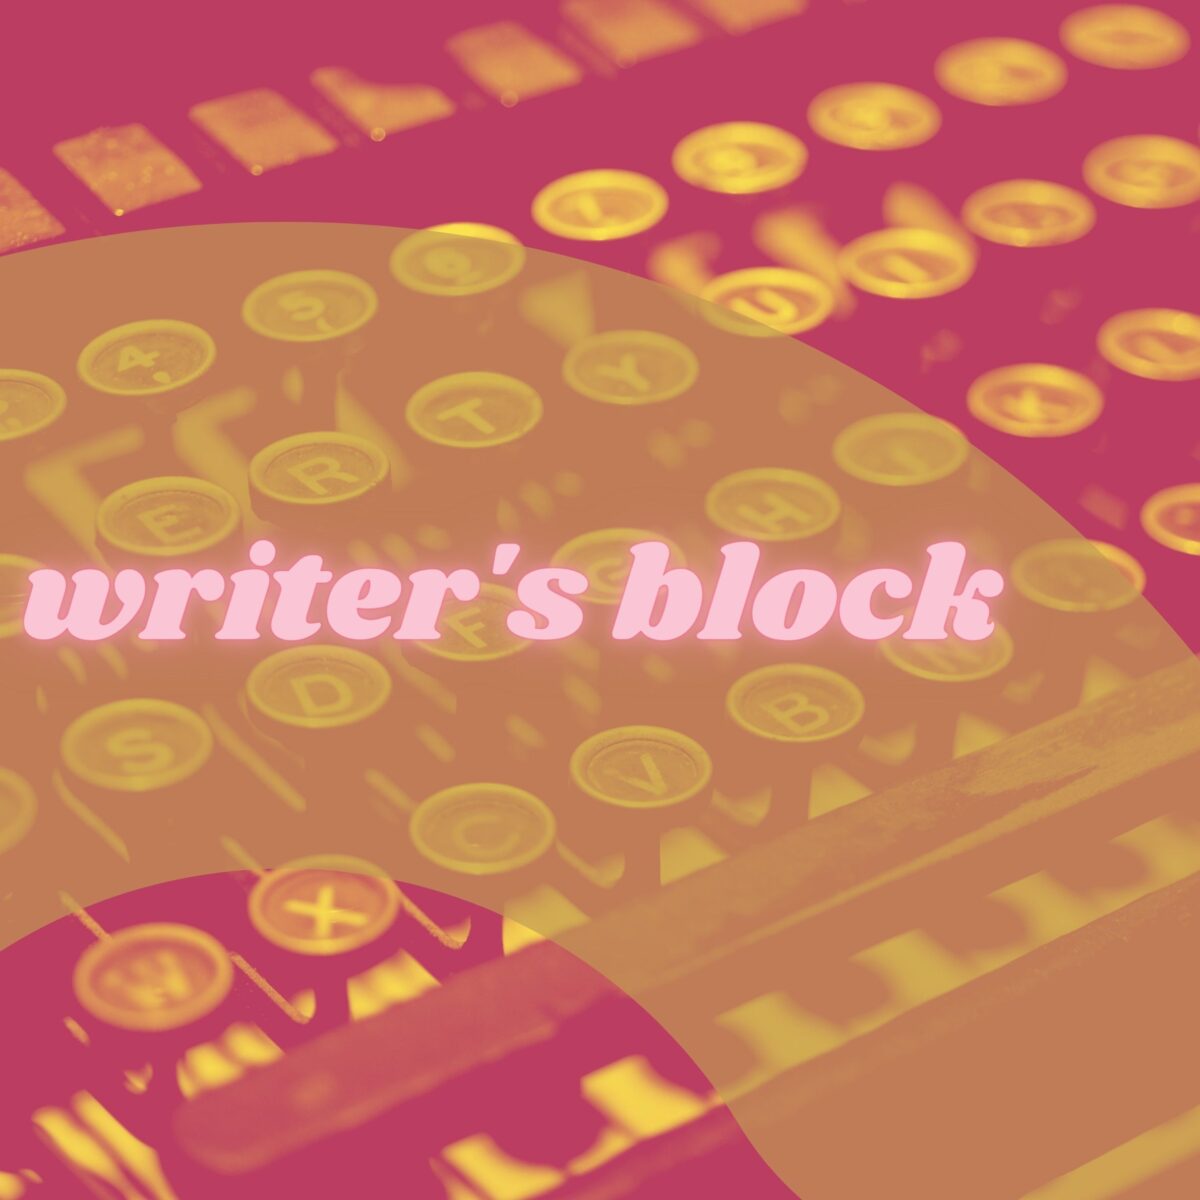 text that reads "Writer's Block." Pink and yellow picture of a typewriter in the background.